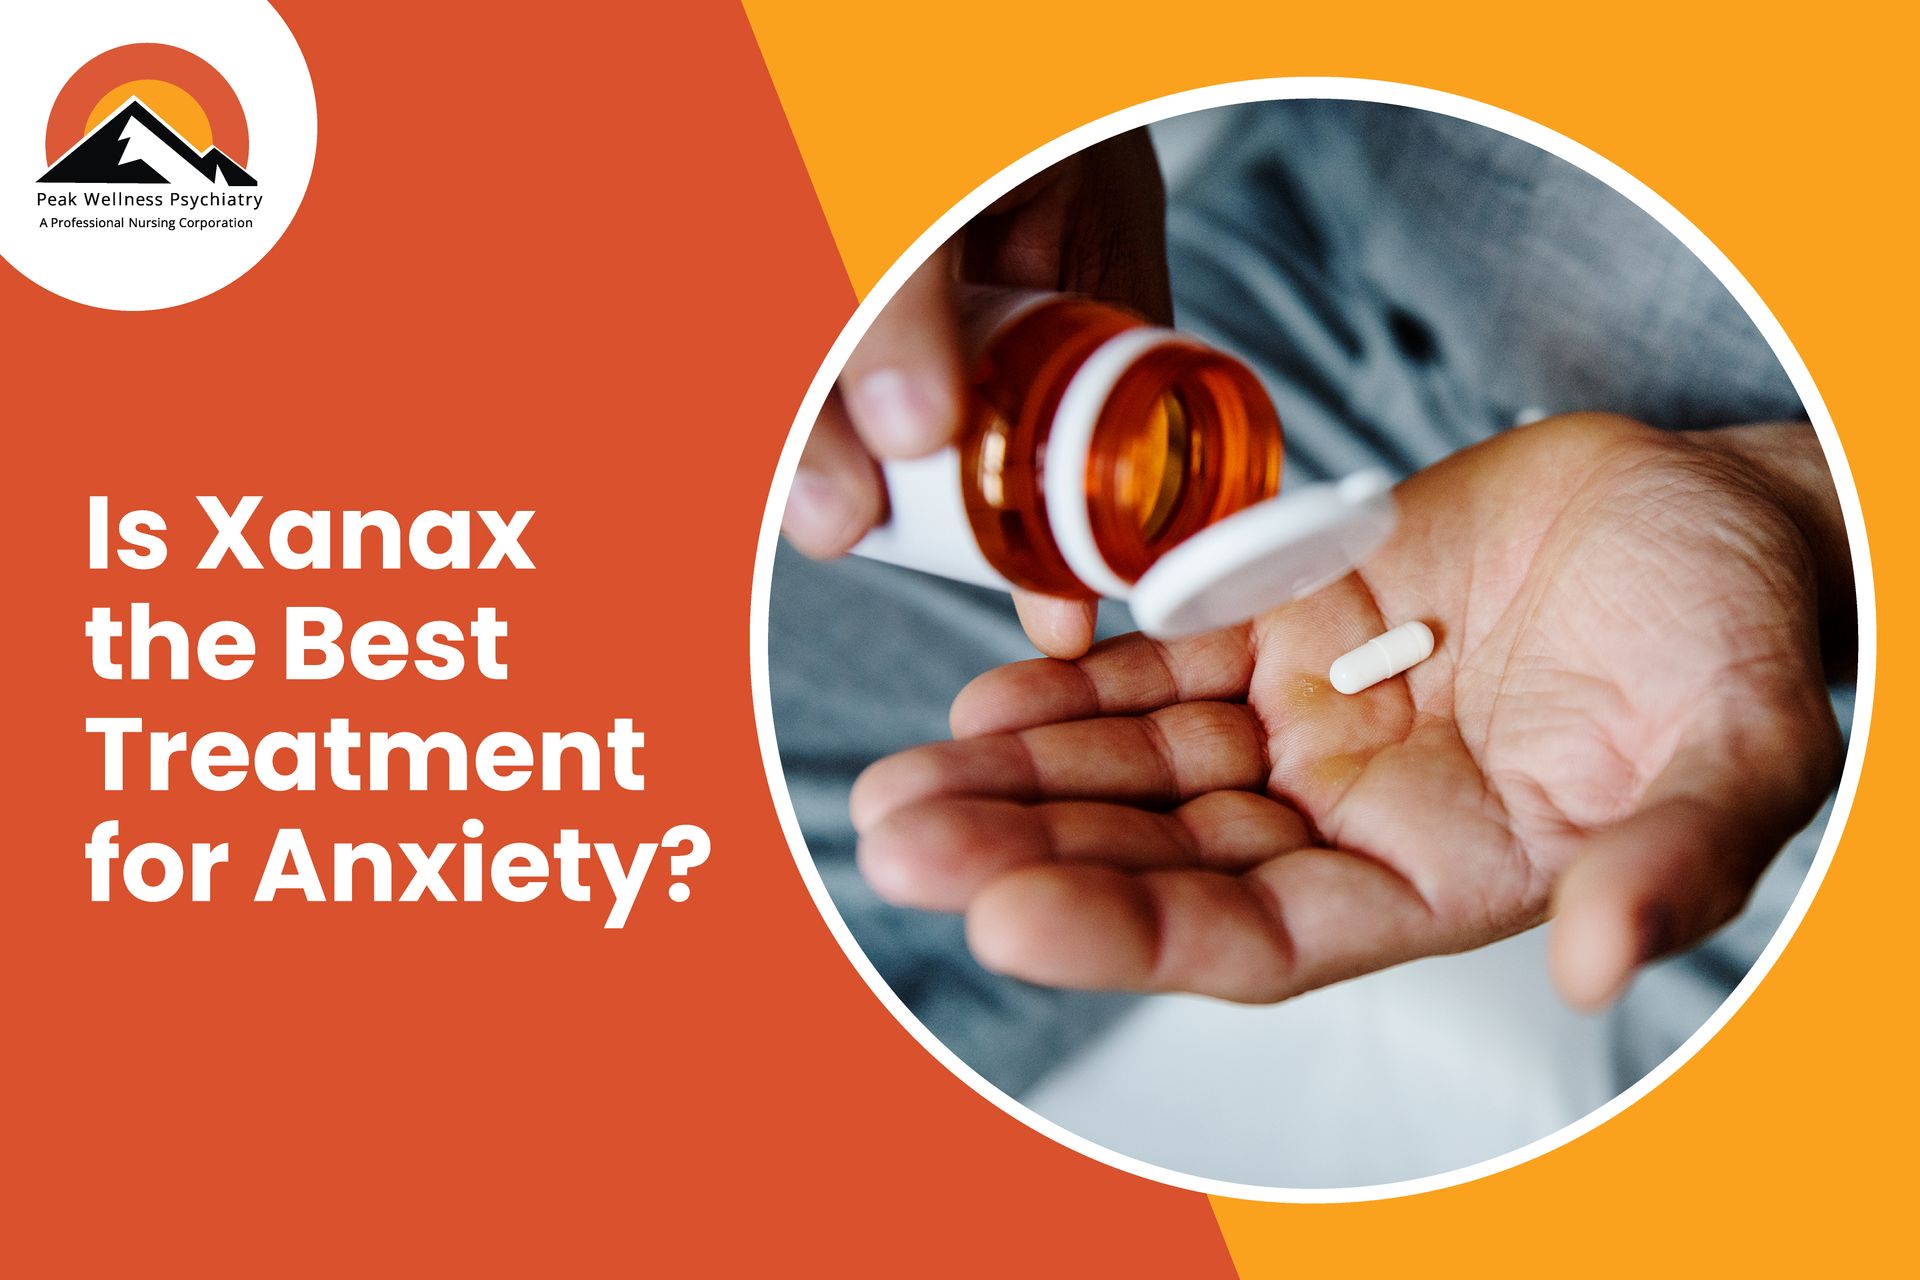 Is Xanax the Best Treatment for Anxiety?